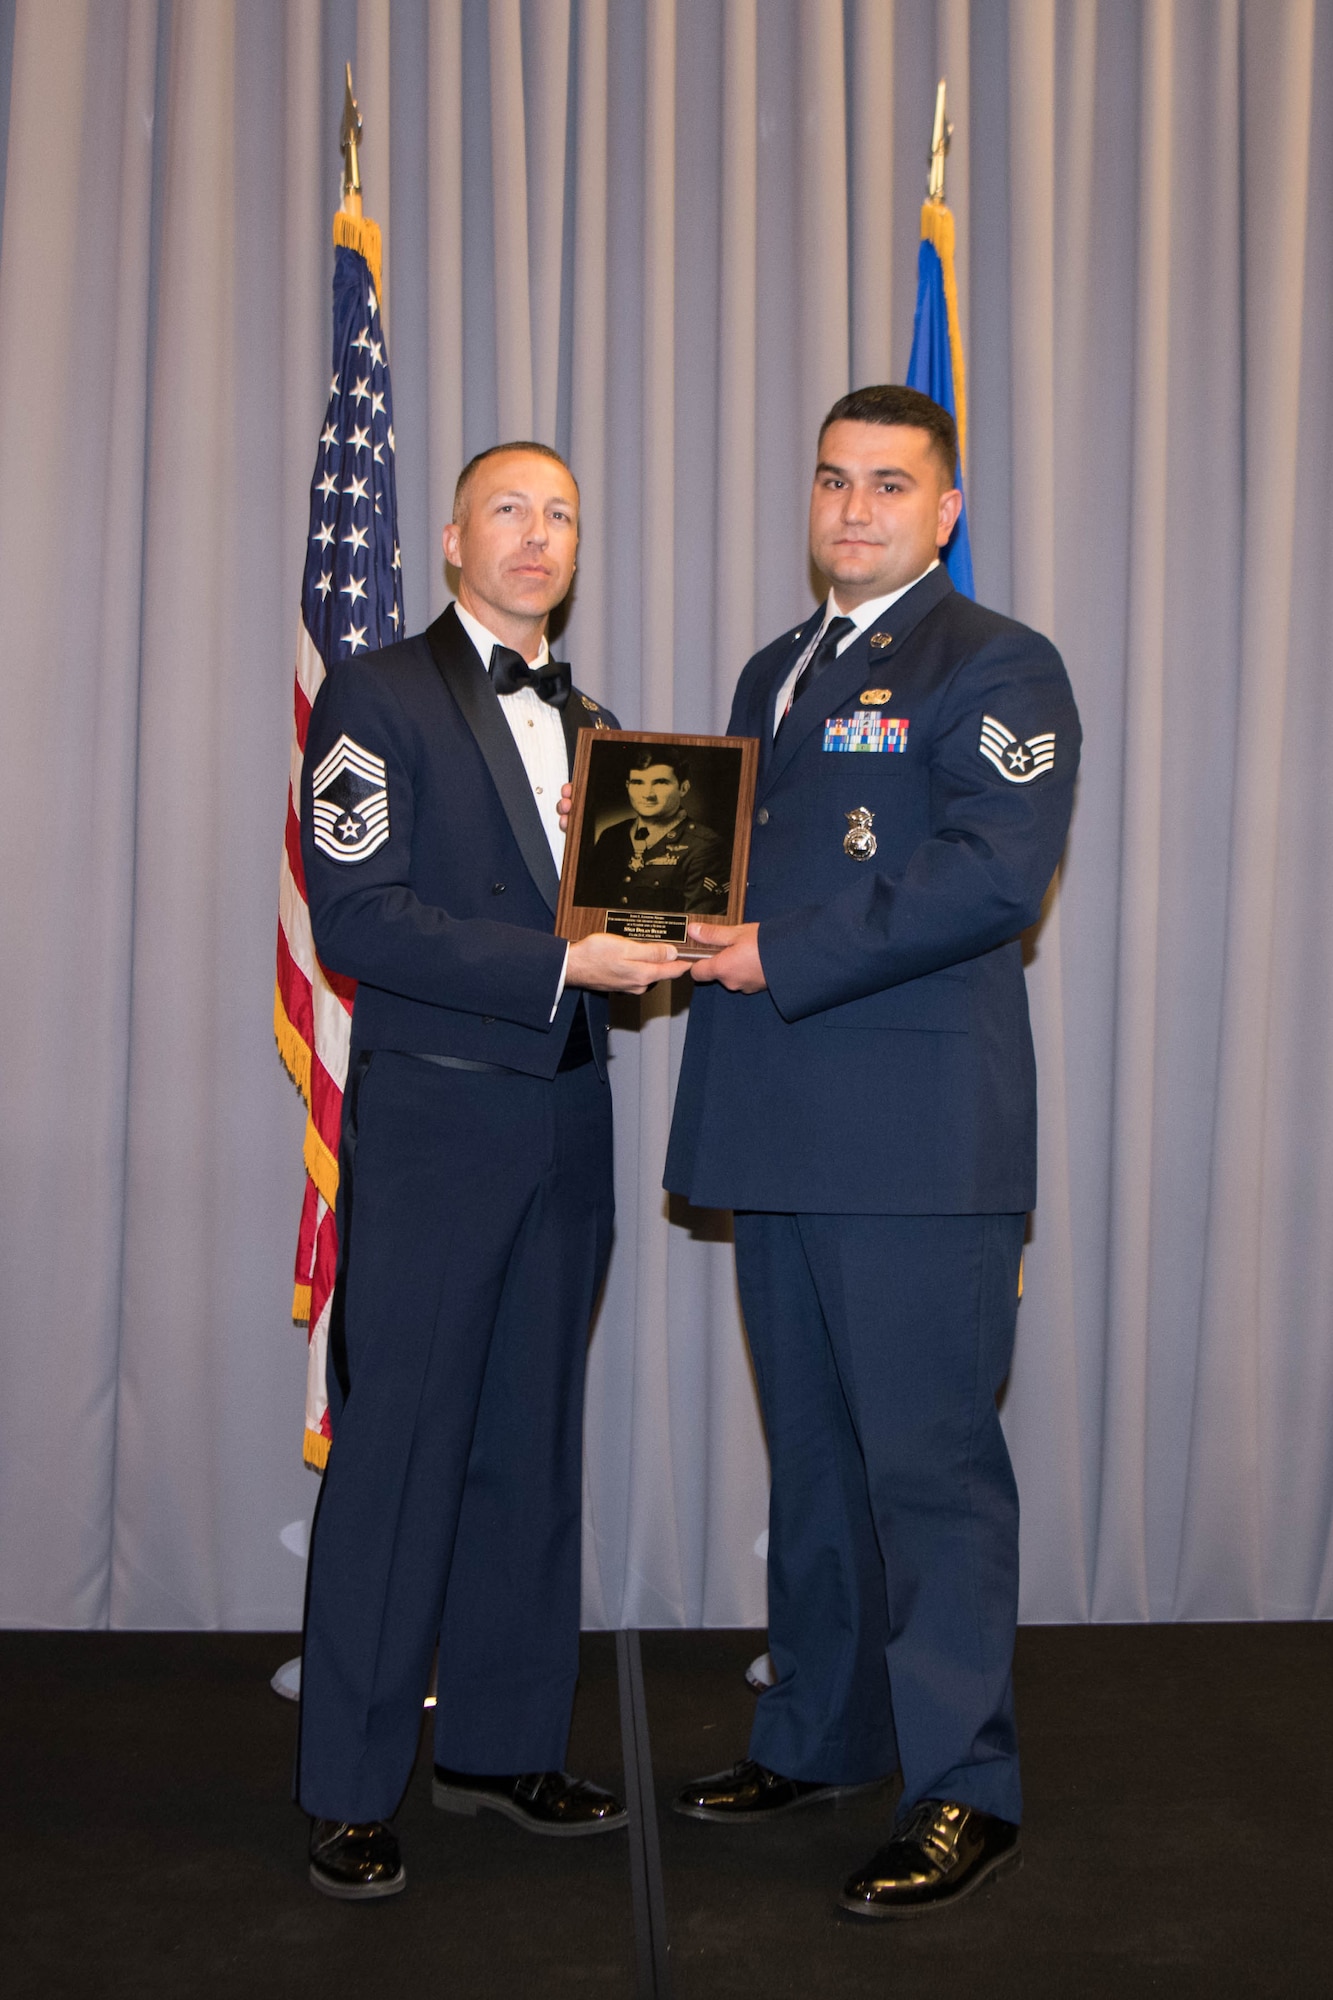 Staff Sgt. Dylan Bulick, 436th Security Force Squadron base defense operations center controller, is presented the John L. Levitow Award by Chief Master Sgt. Troy Dubois, 436th Logistics Readiness Squadron superintendent, during the Staff Sgt. Julio Alonso Airman Leadership School, Class 21-F, dinner and graduation ceremony held at The Landings on Dover Air Force Base, Delaware, July 22, 2021. This was the first post-COVID-19 dinner and graduation ceremony held since February 6, 2020. (U.S. Air Force photo by Mauricio Campino)